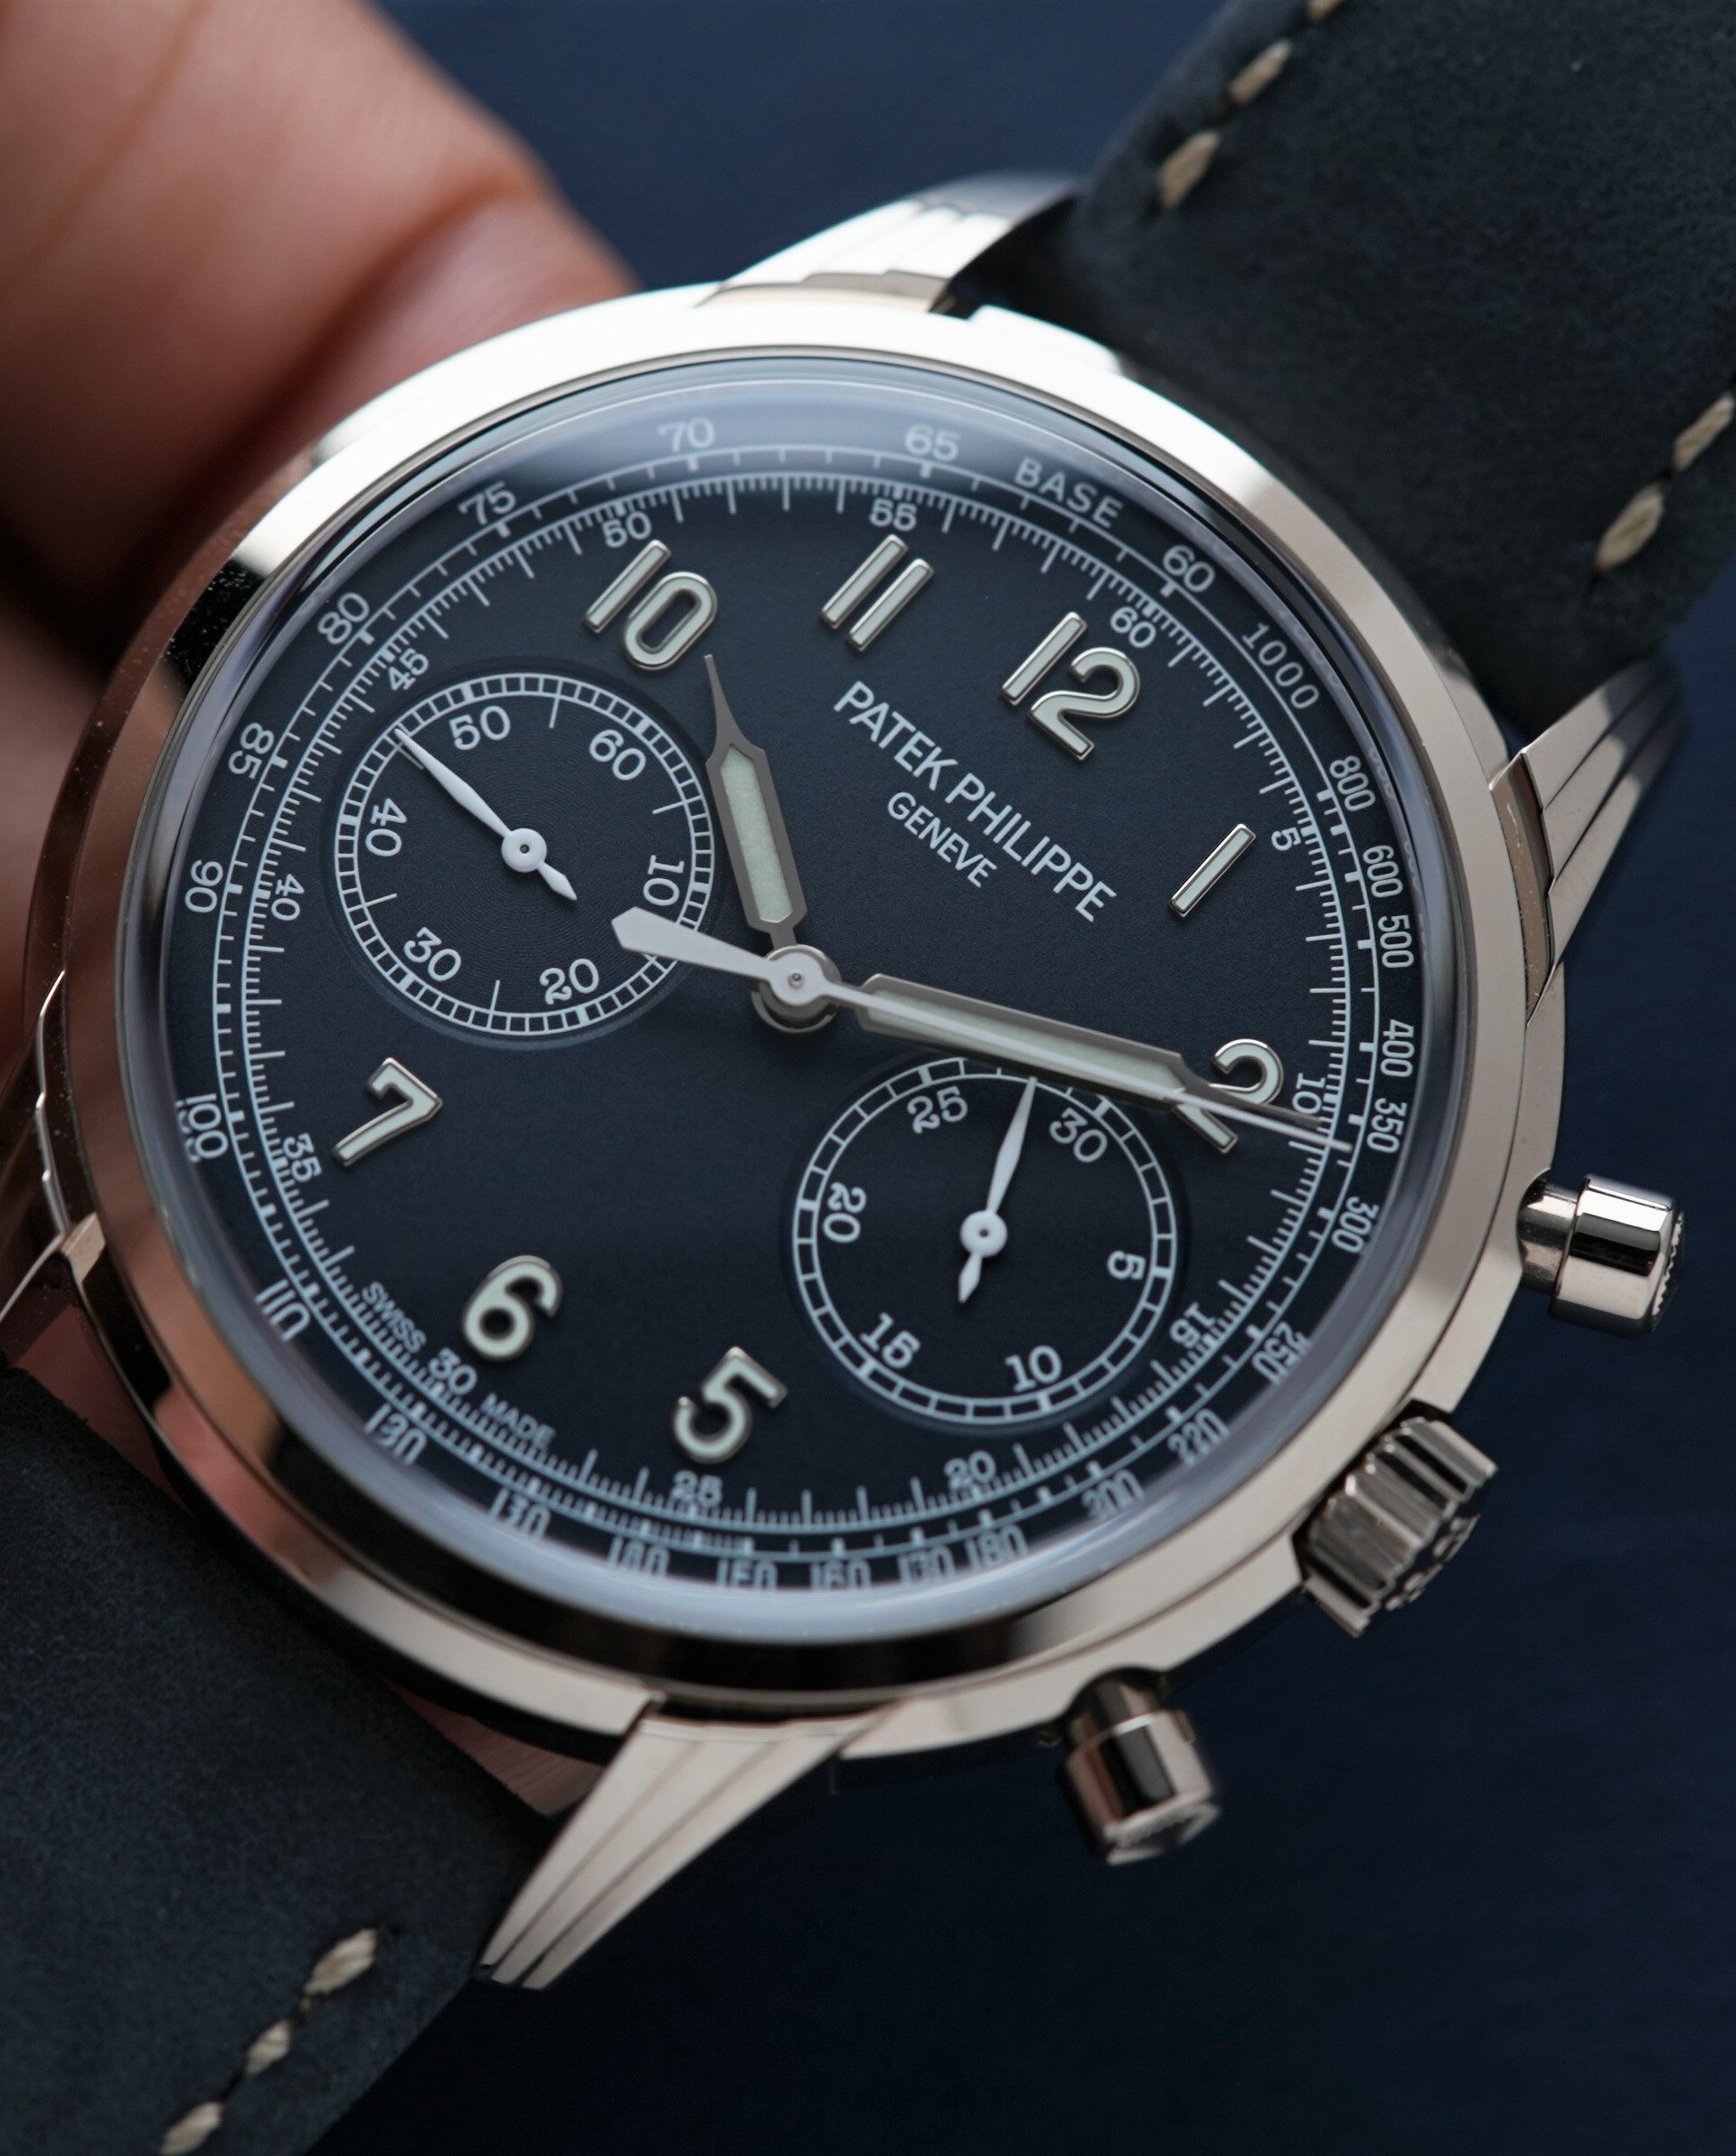 Patek Philippe Chronograph 5172 Complications Chronograph Recently Serviced Seal 5172G-001 White Gold watch being held in hand.